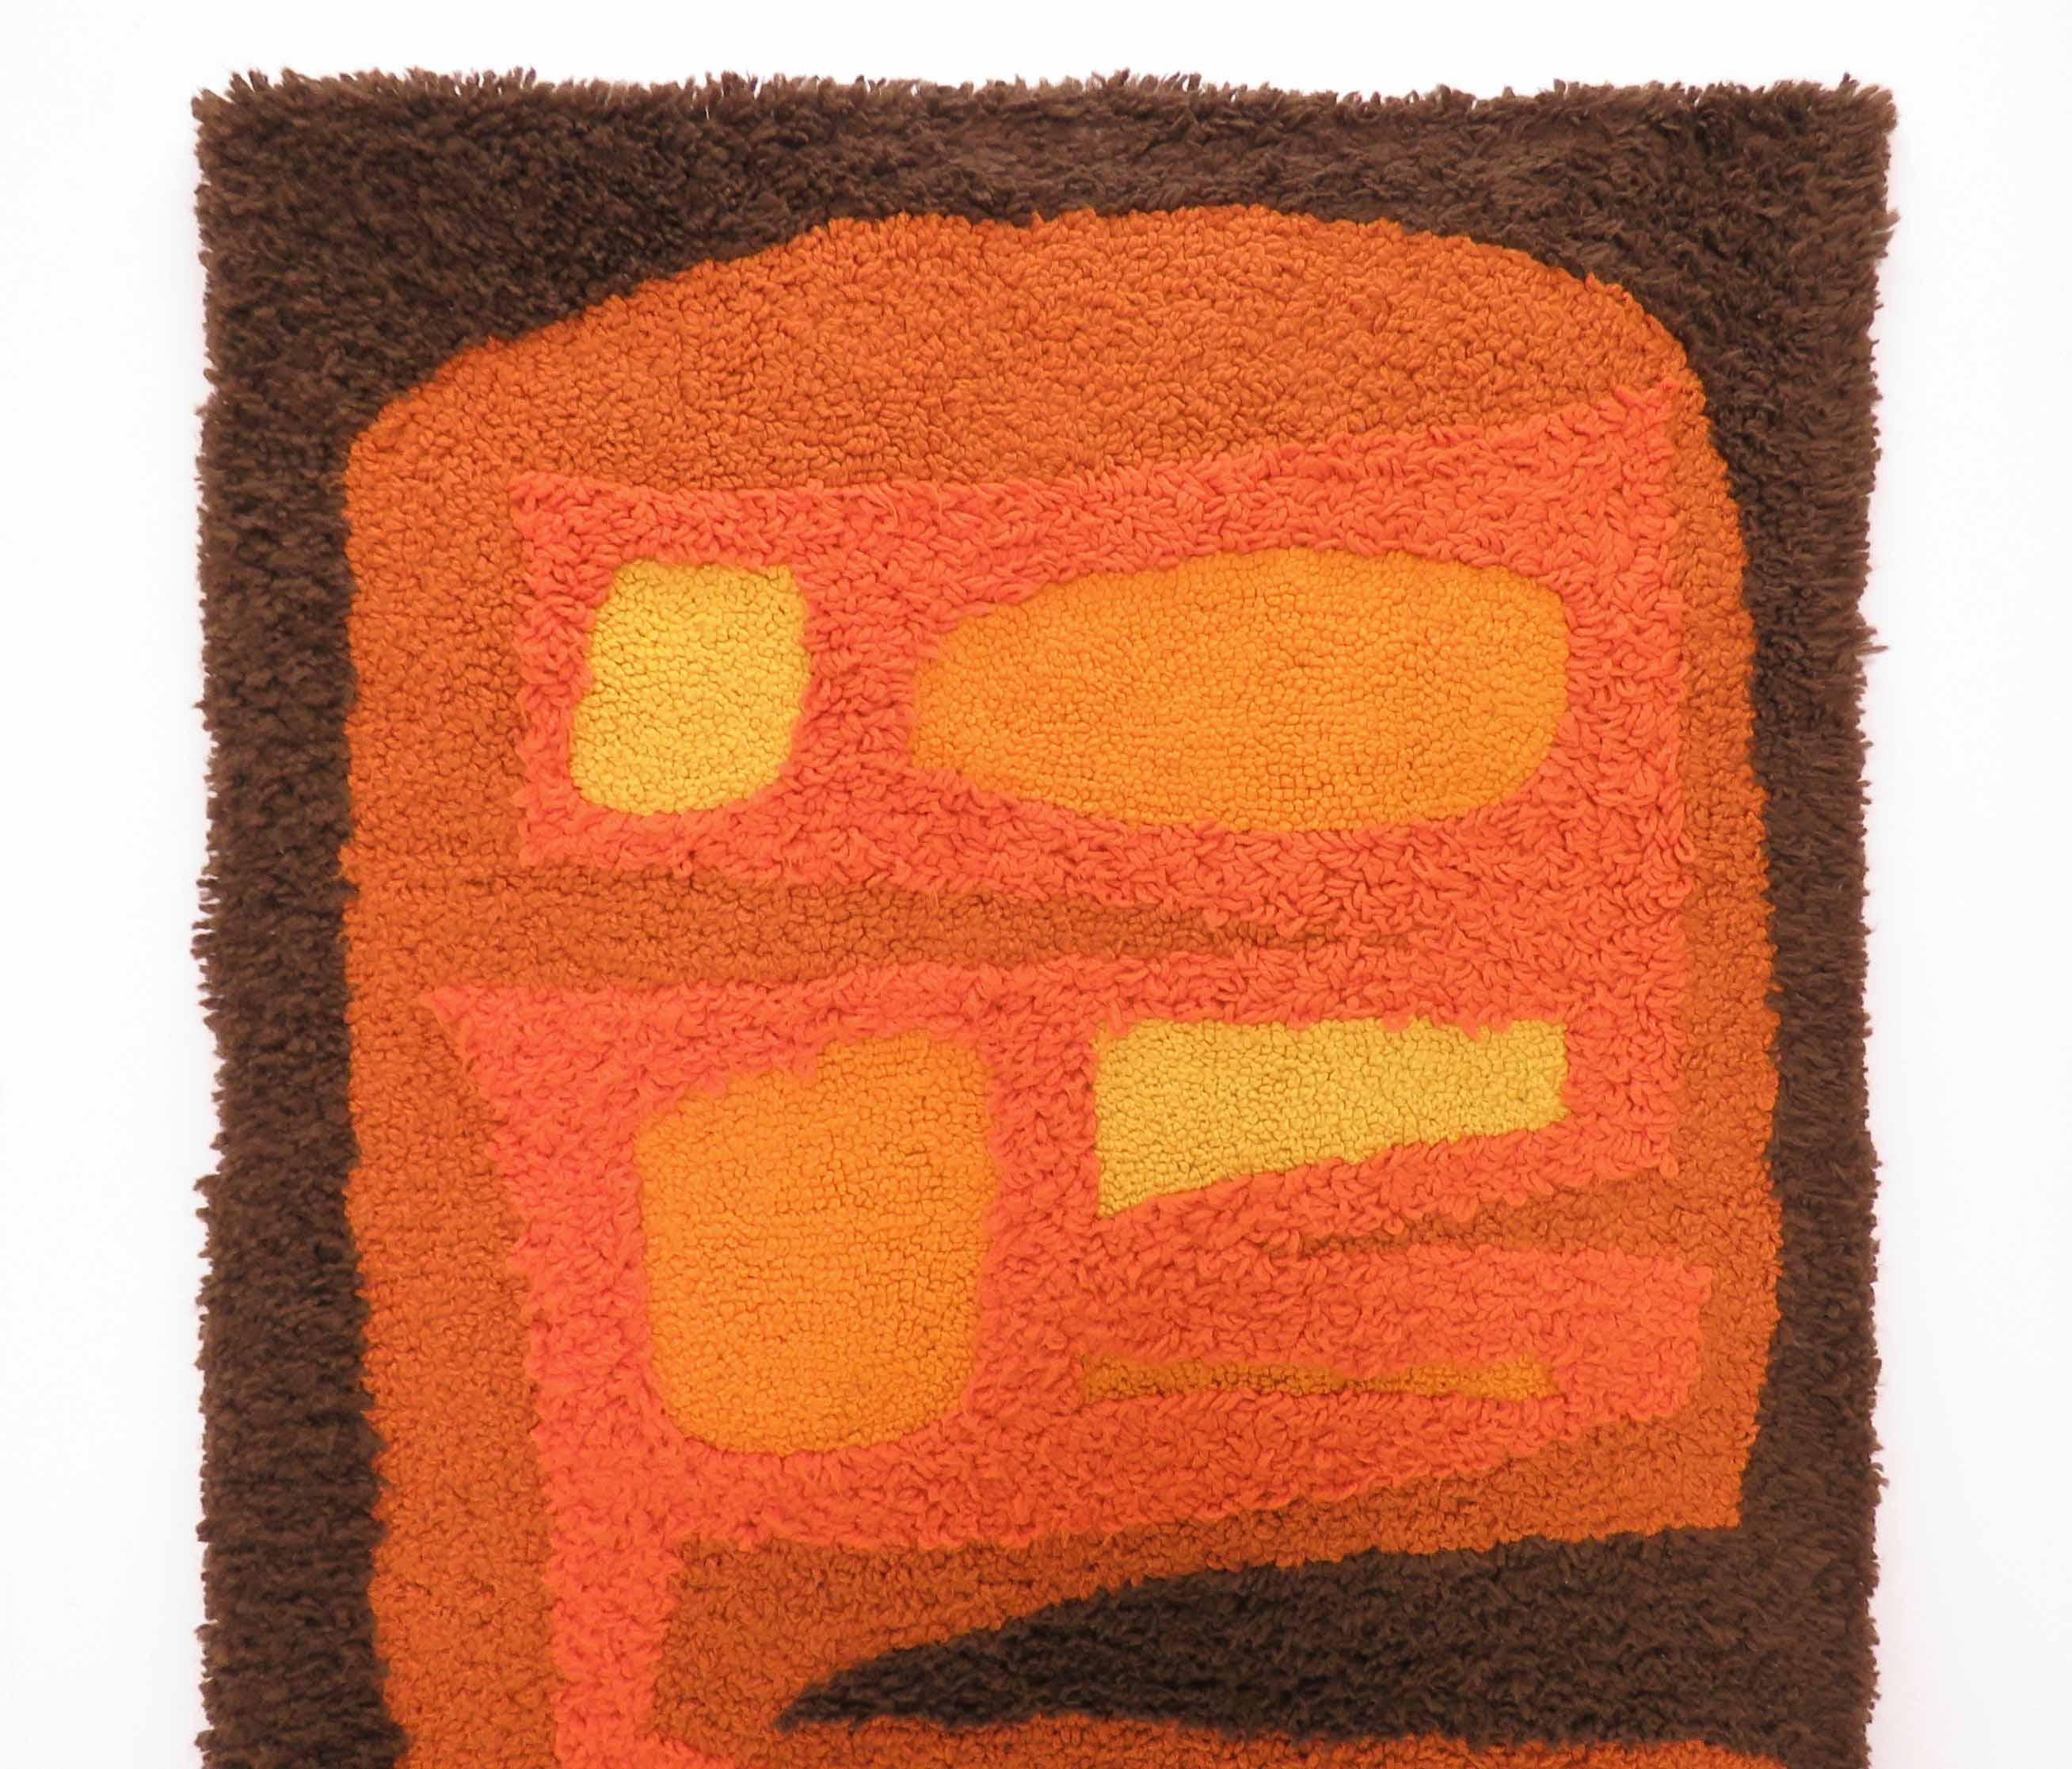 Hand hooked fiber art wall hanging with a modernist abstract motif, circa 1970s.